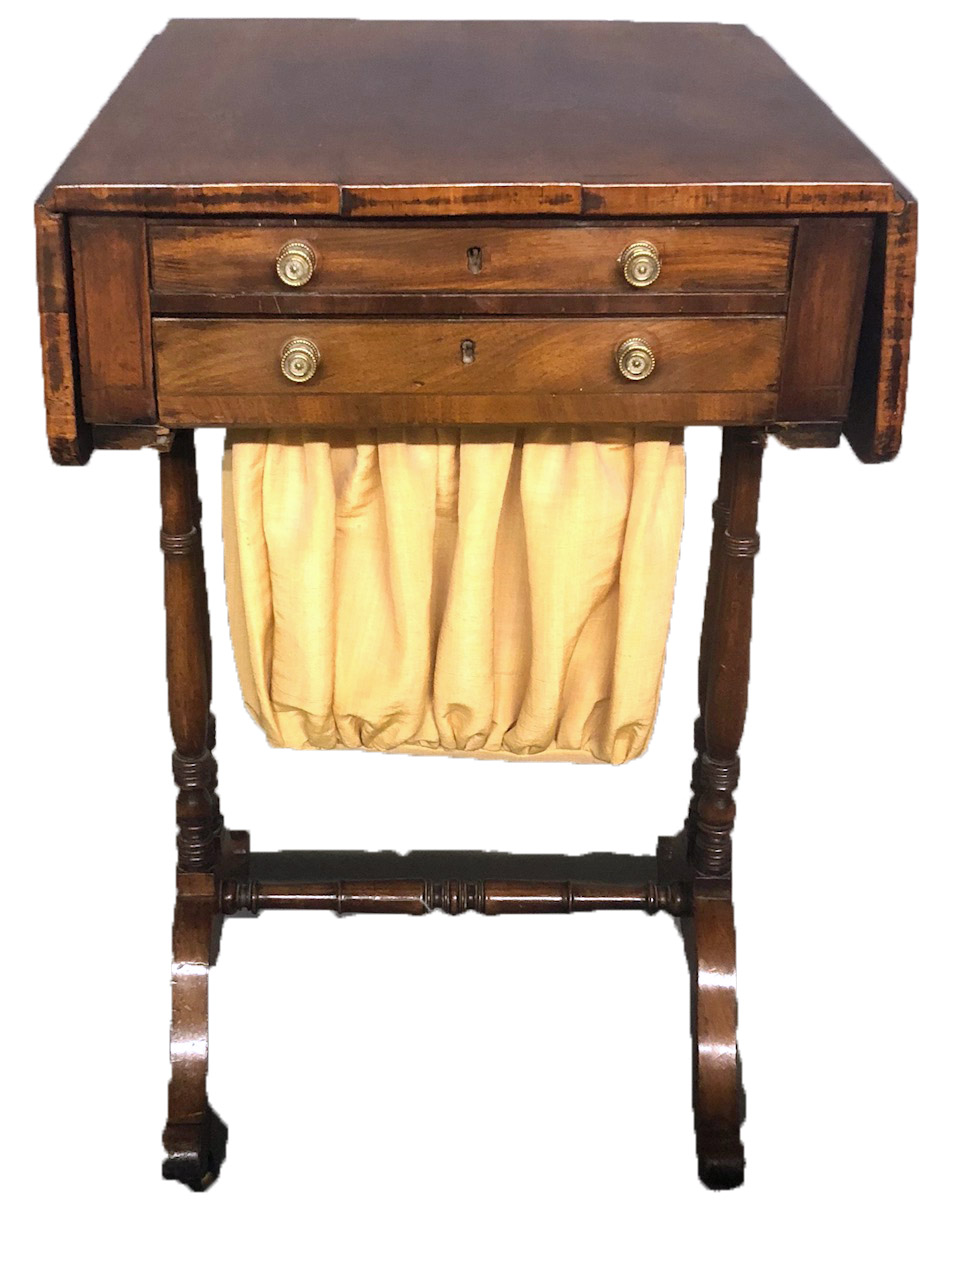 A 19TH CENTURY MAHOGANY WORK/SIDE TABLE With drop leaves above real and false drawers and fabric